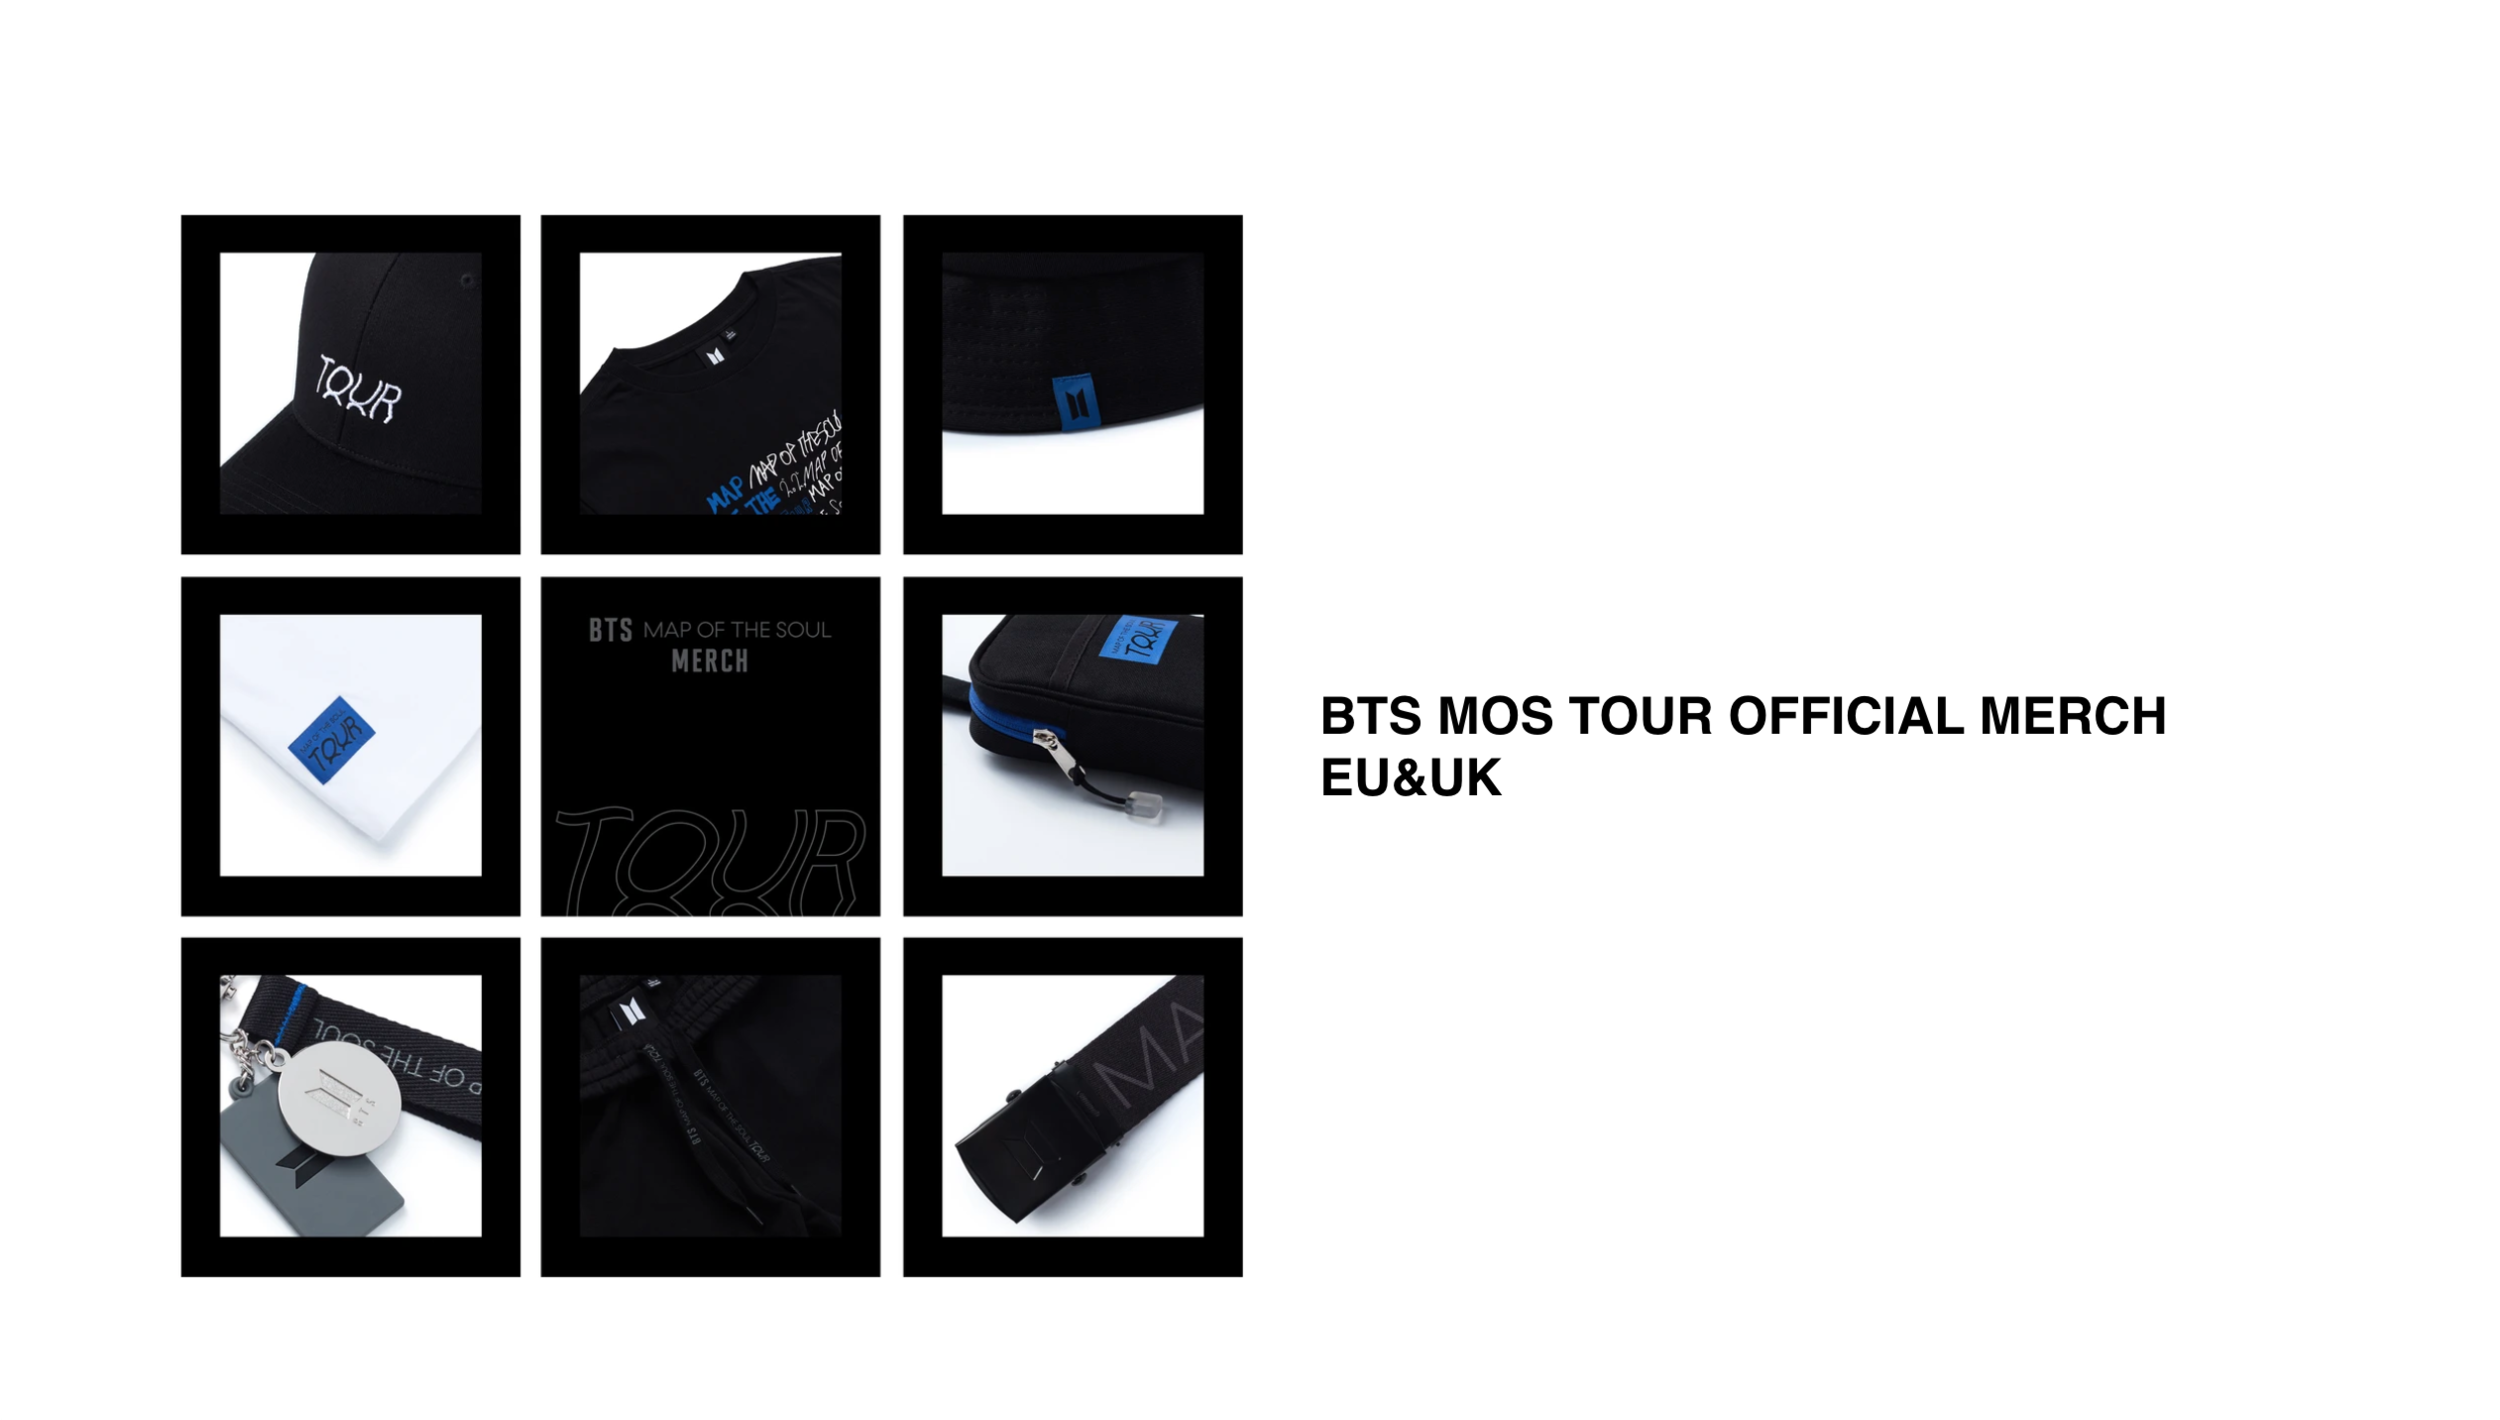 BTS Backpack - Map of the soul 7 (Black, White)